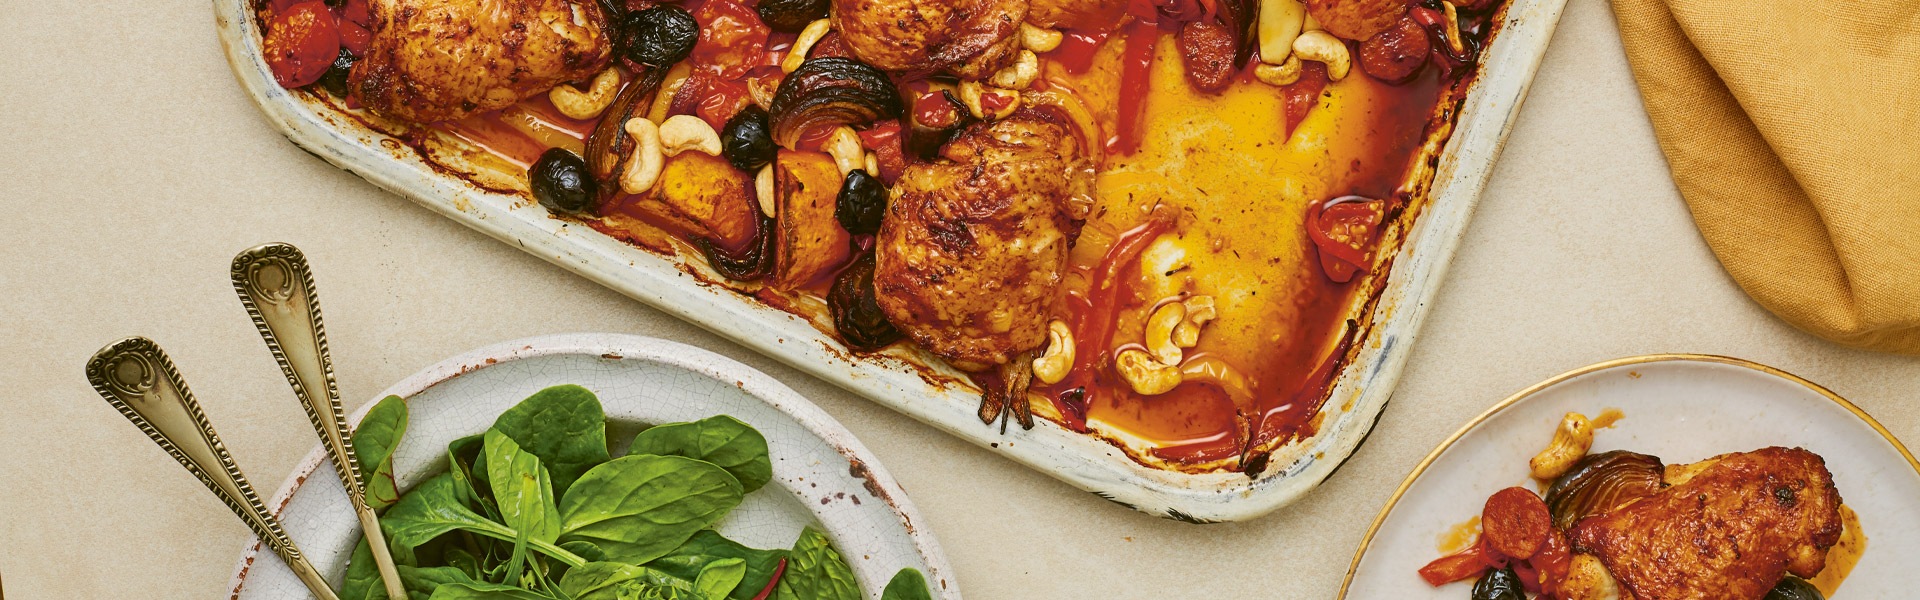 Spicy chicken tray bake recipe with cashew nuts by Candice Brown